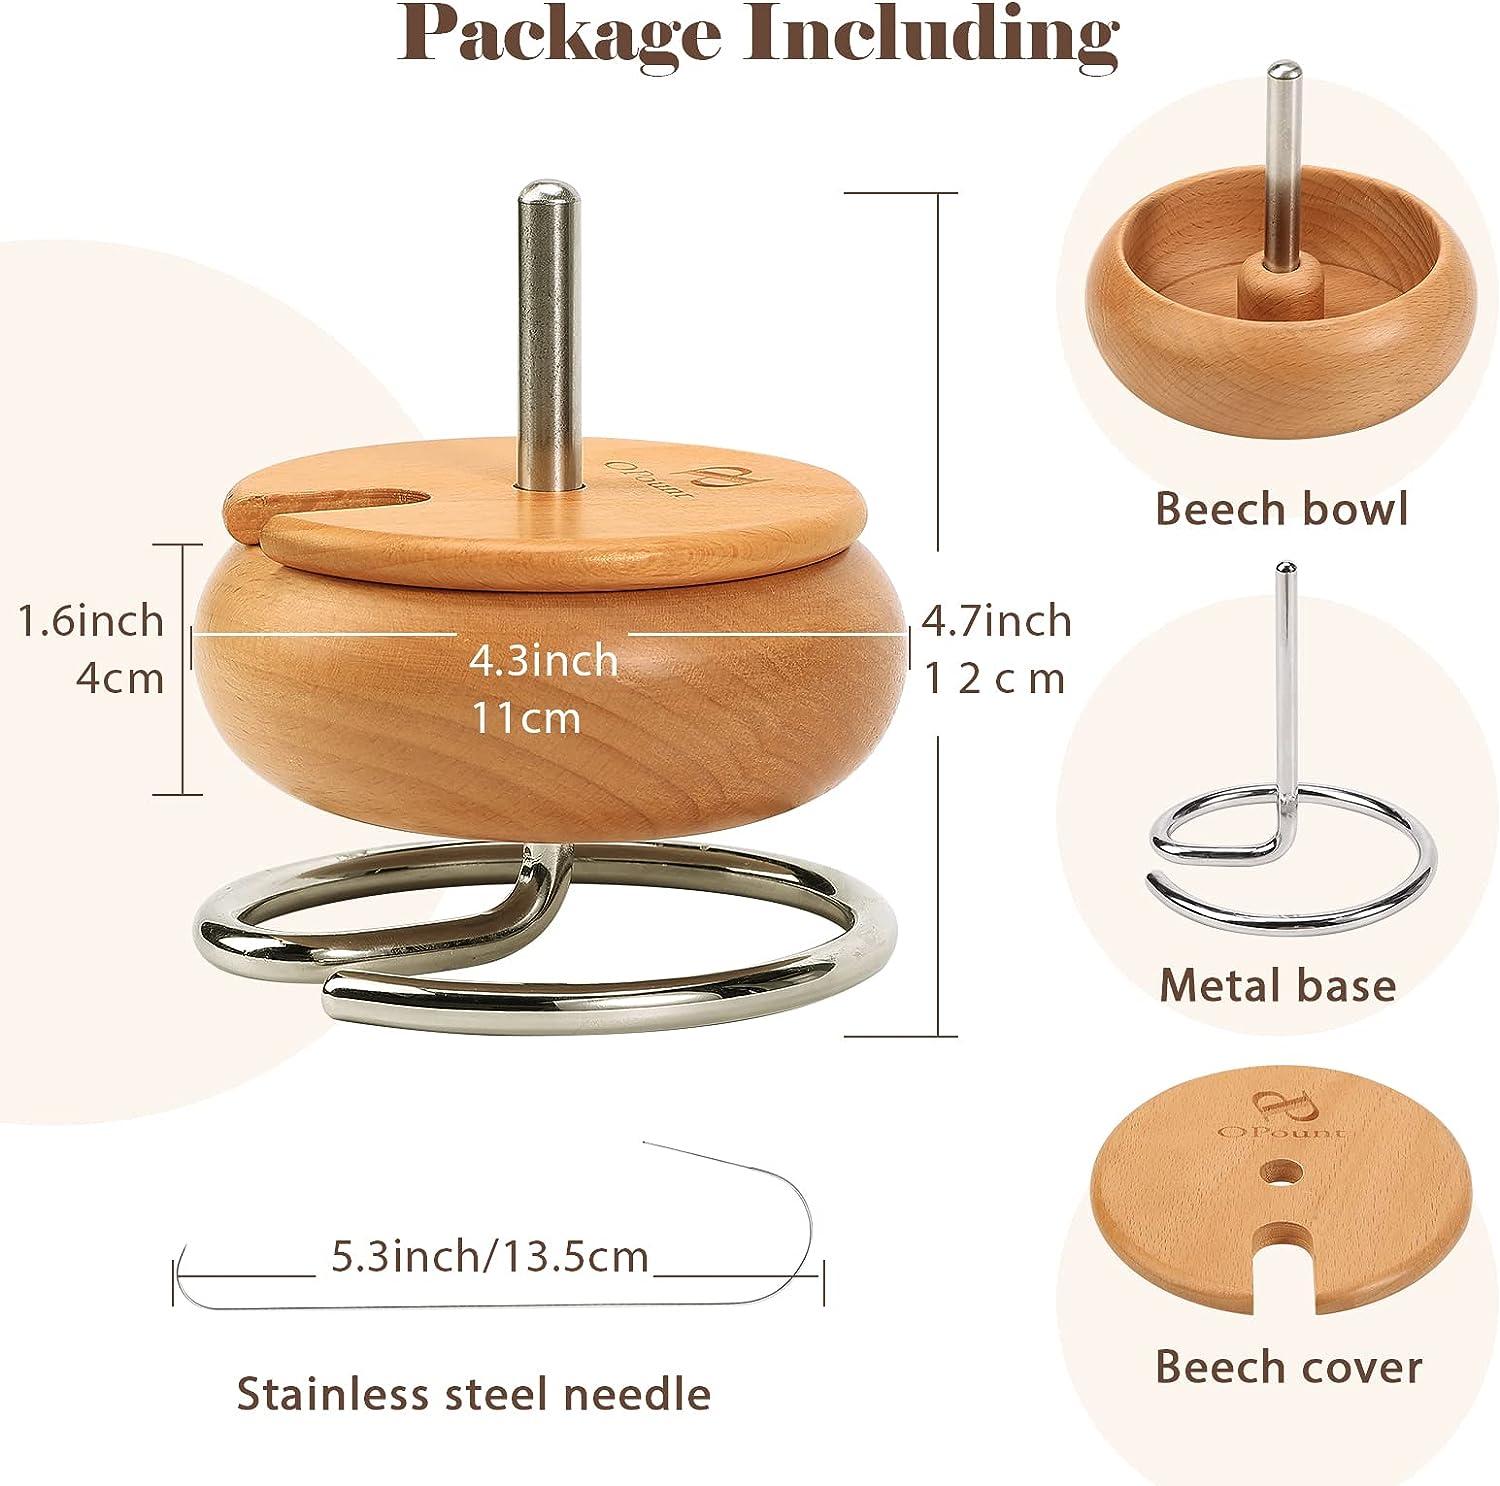 Clay Beads Spinner Wood Bead Spinner Waist Bead Spinner Electric Beading  Bowl For Jewelry Making And Seed Clay Beading DIY Craft